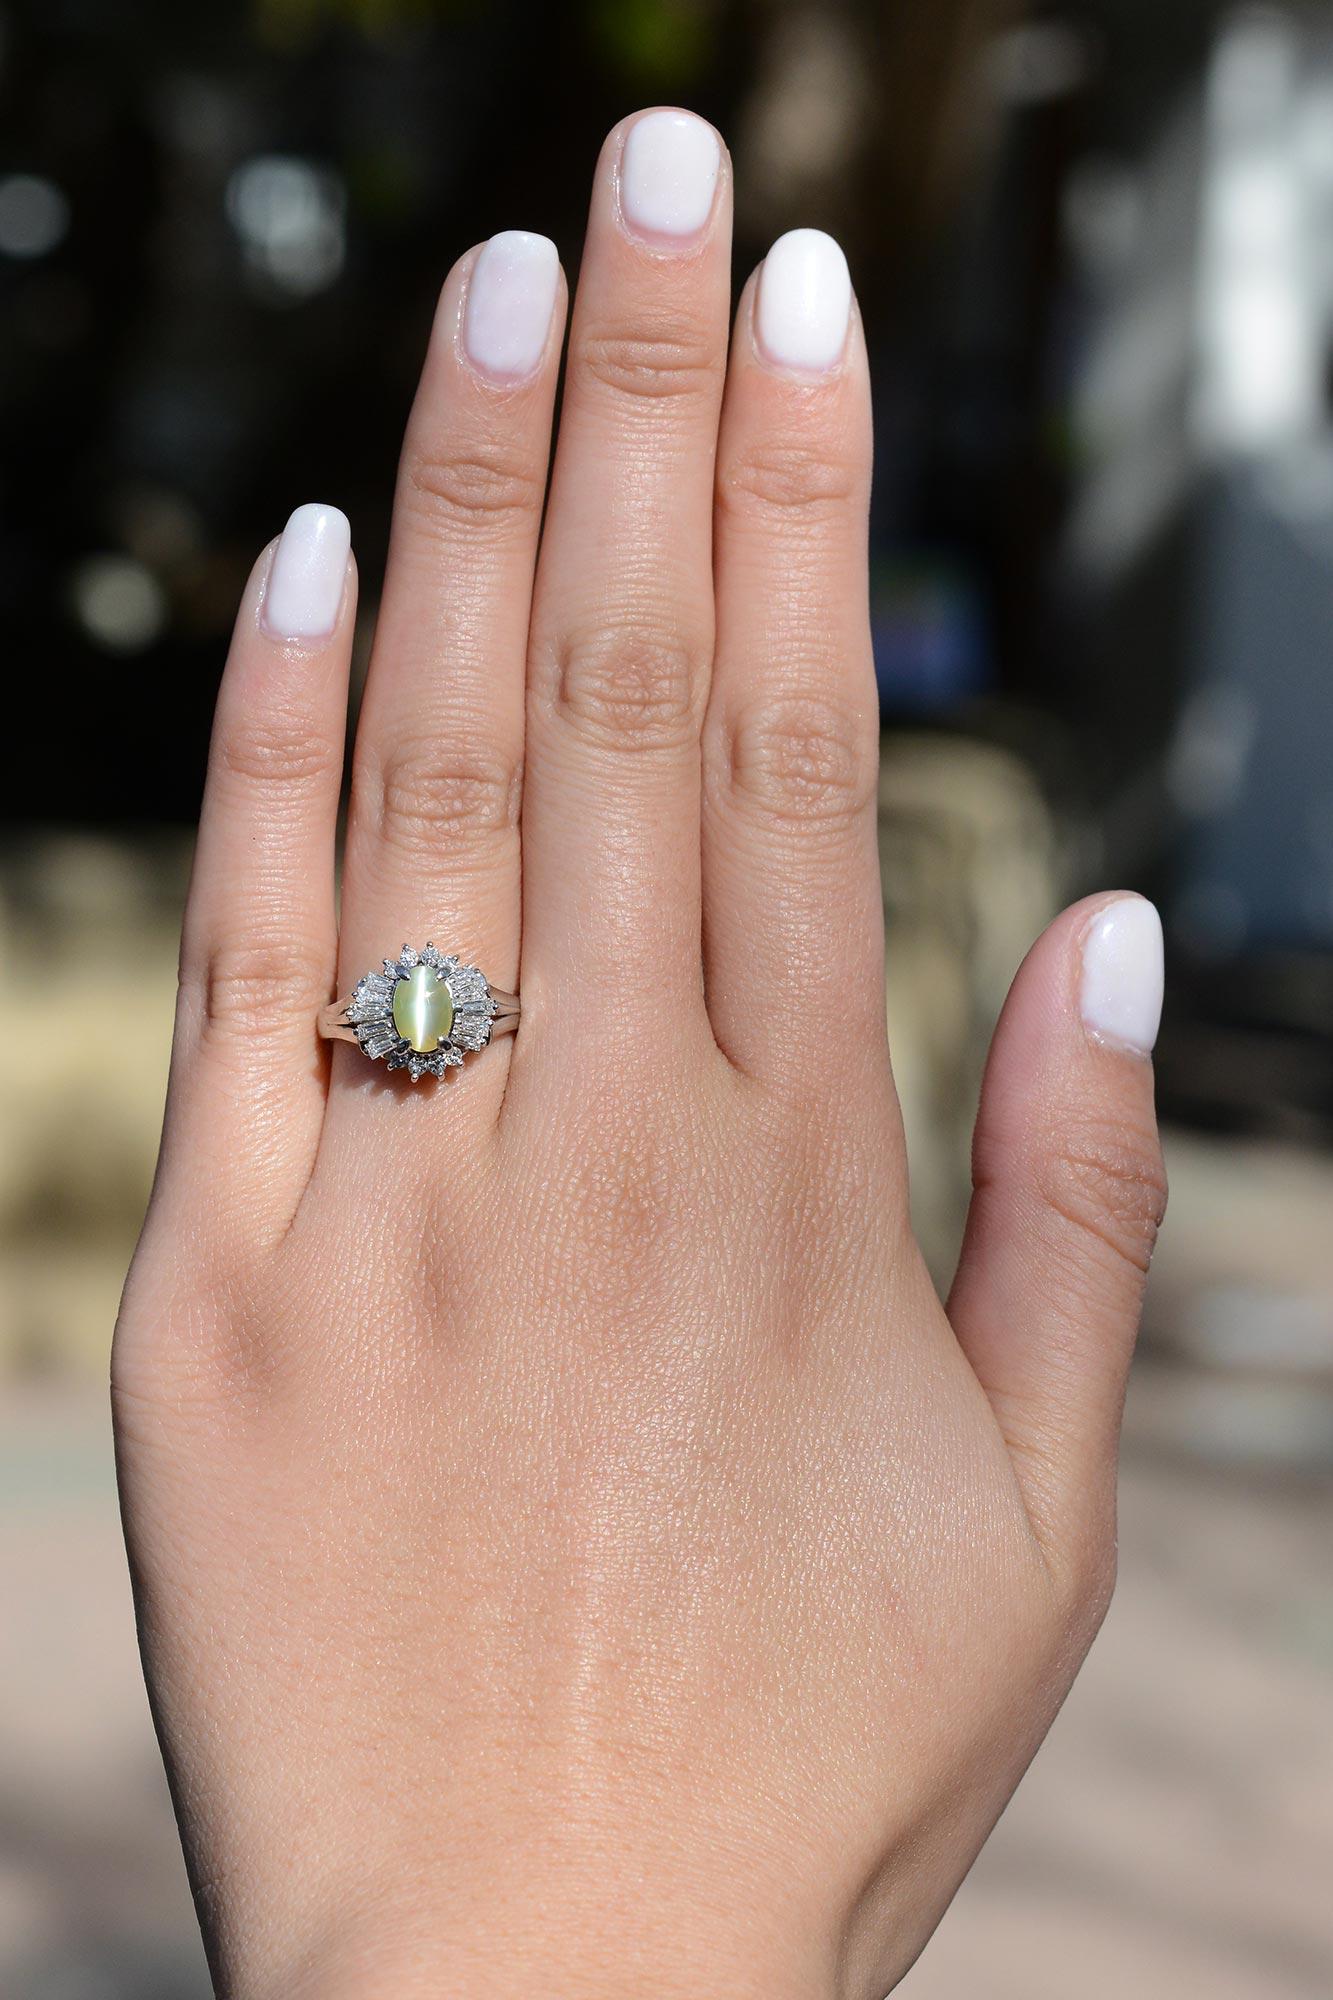 A classic mid century estate ring with a compellingly hypnotic center gemstone. This captivating cat's eye chrysoberyl displays a striking natural phenomenon that is extremely rare. A wonderful soothing green color along with a creamy flash pairs